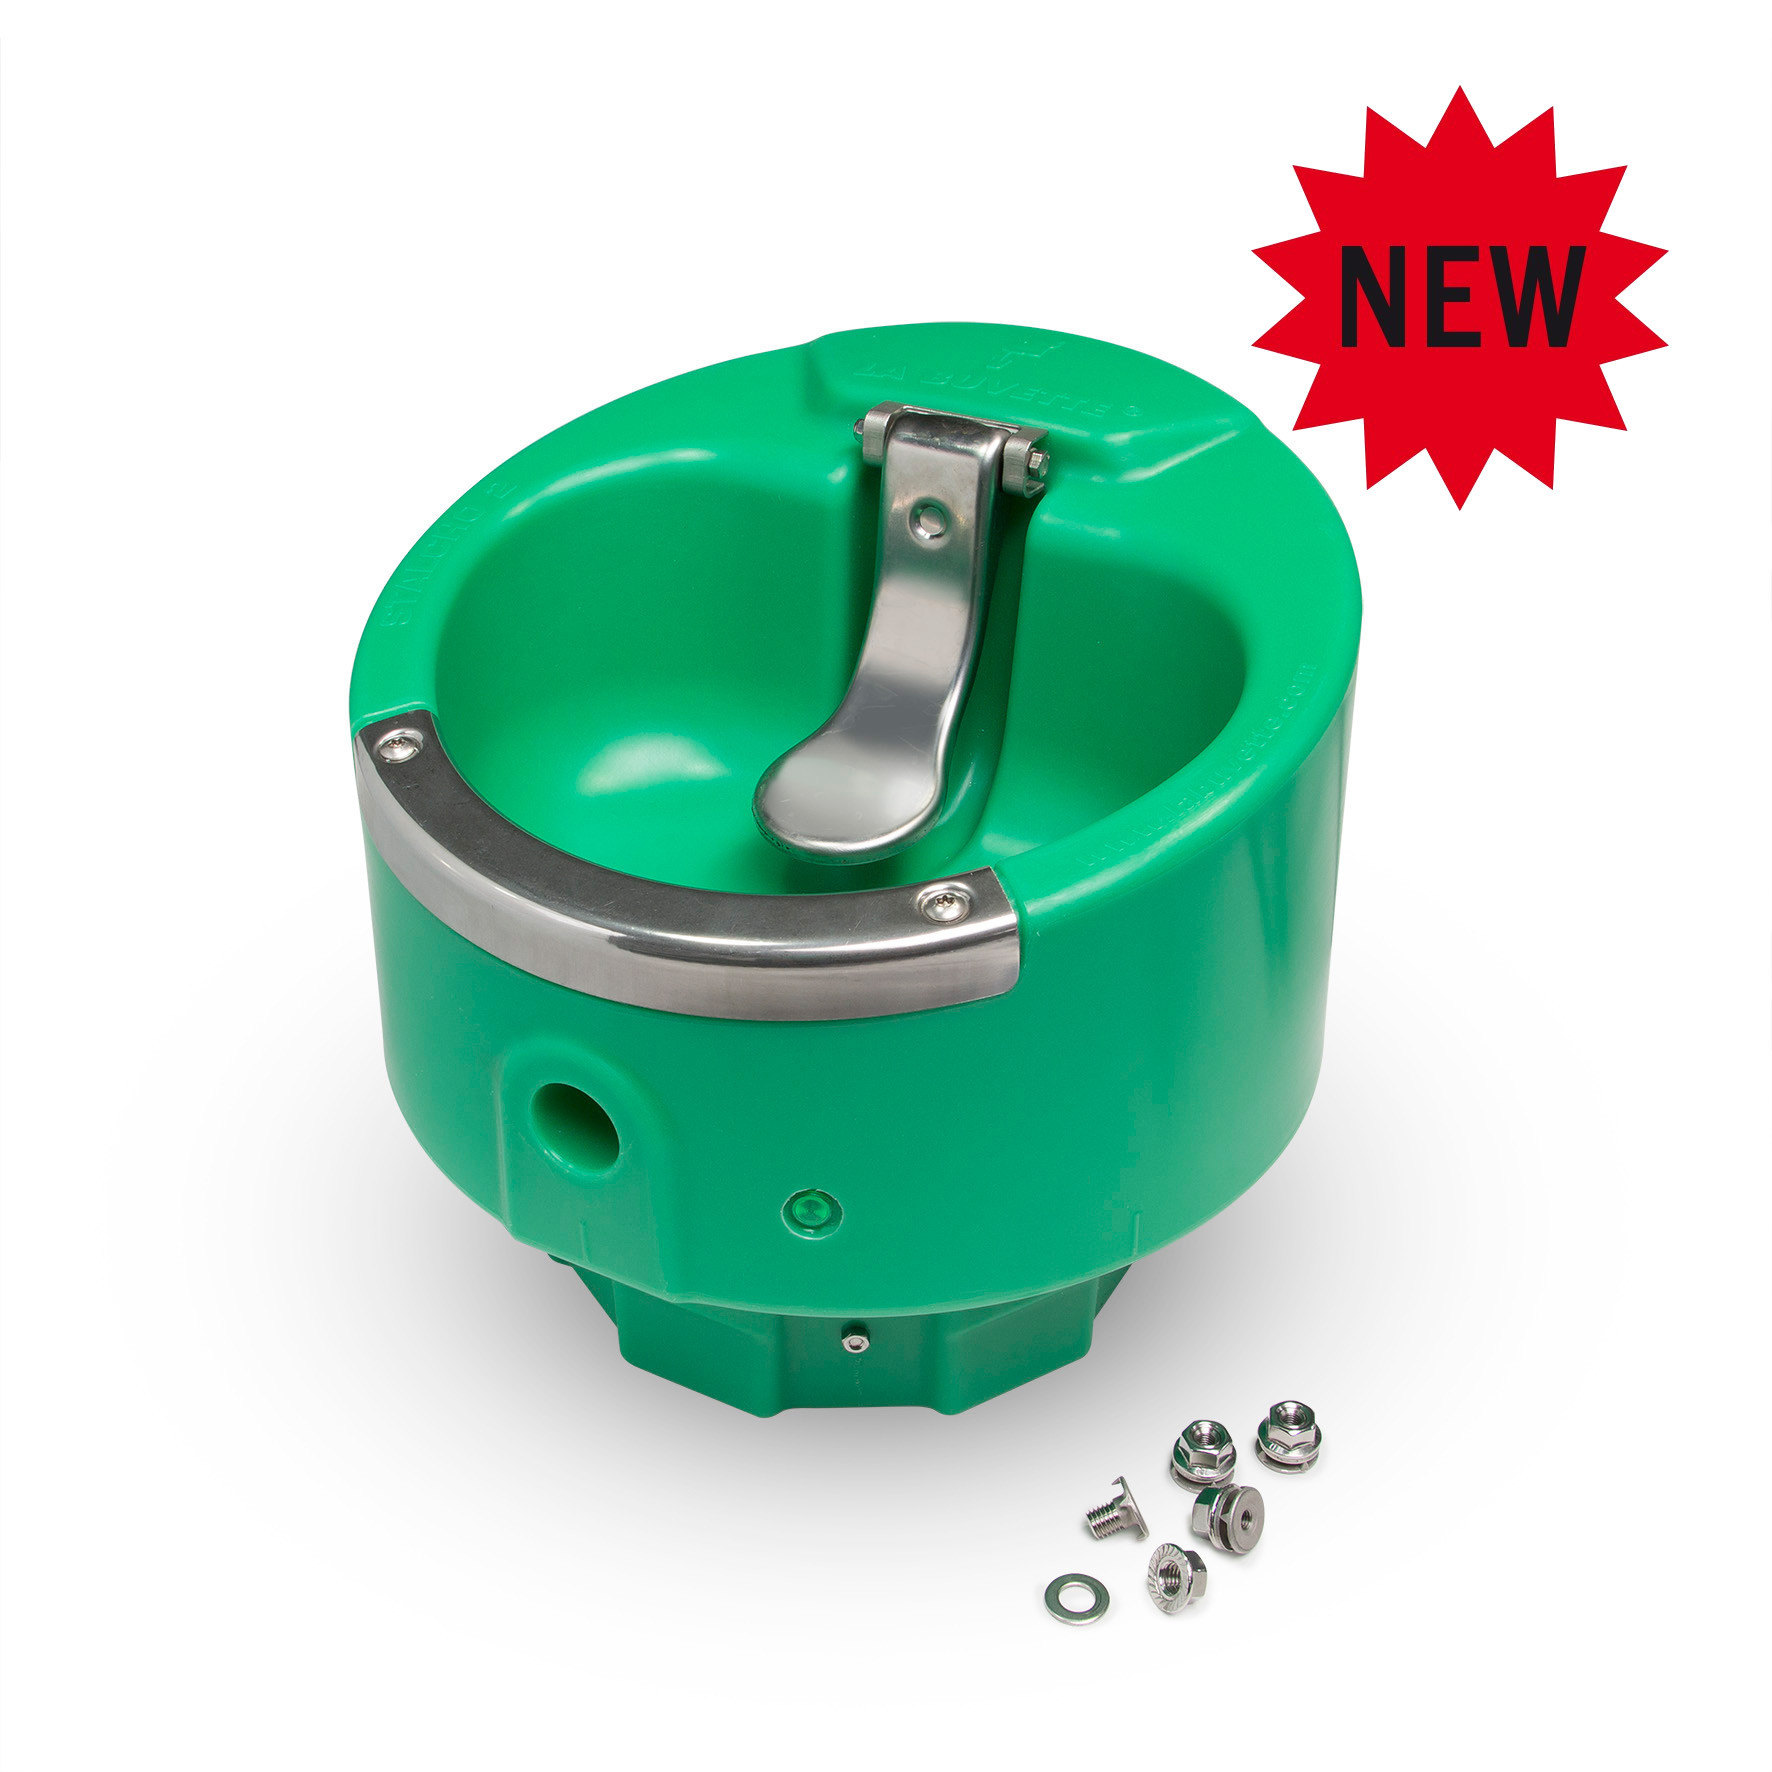 NEW Frost-free drinking bowl with paddle valve STALCHO2